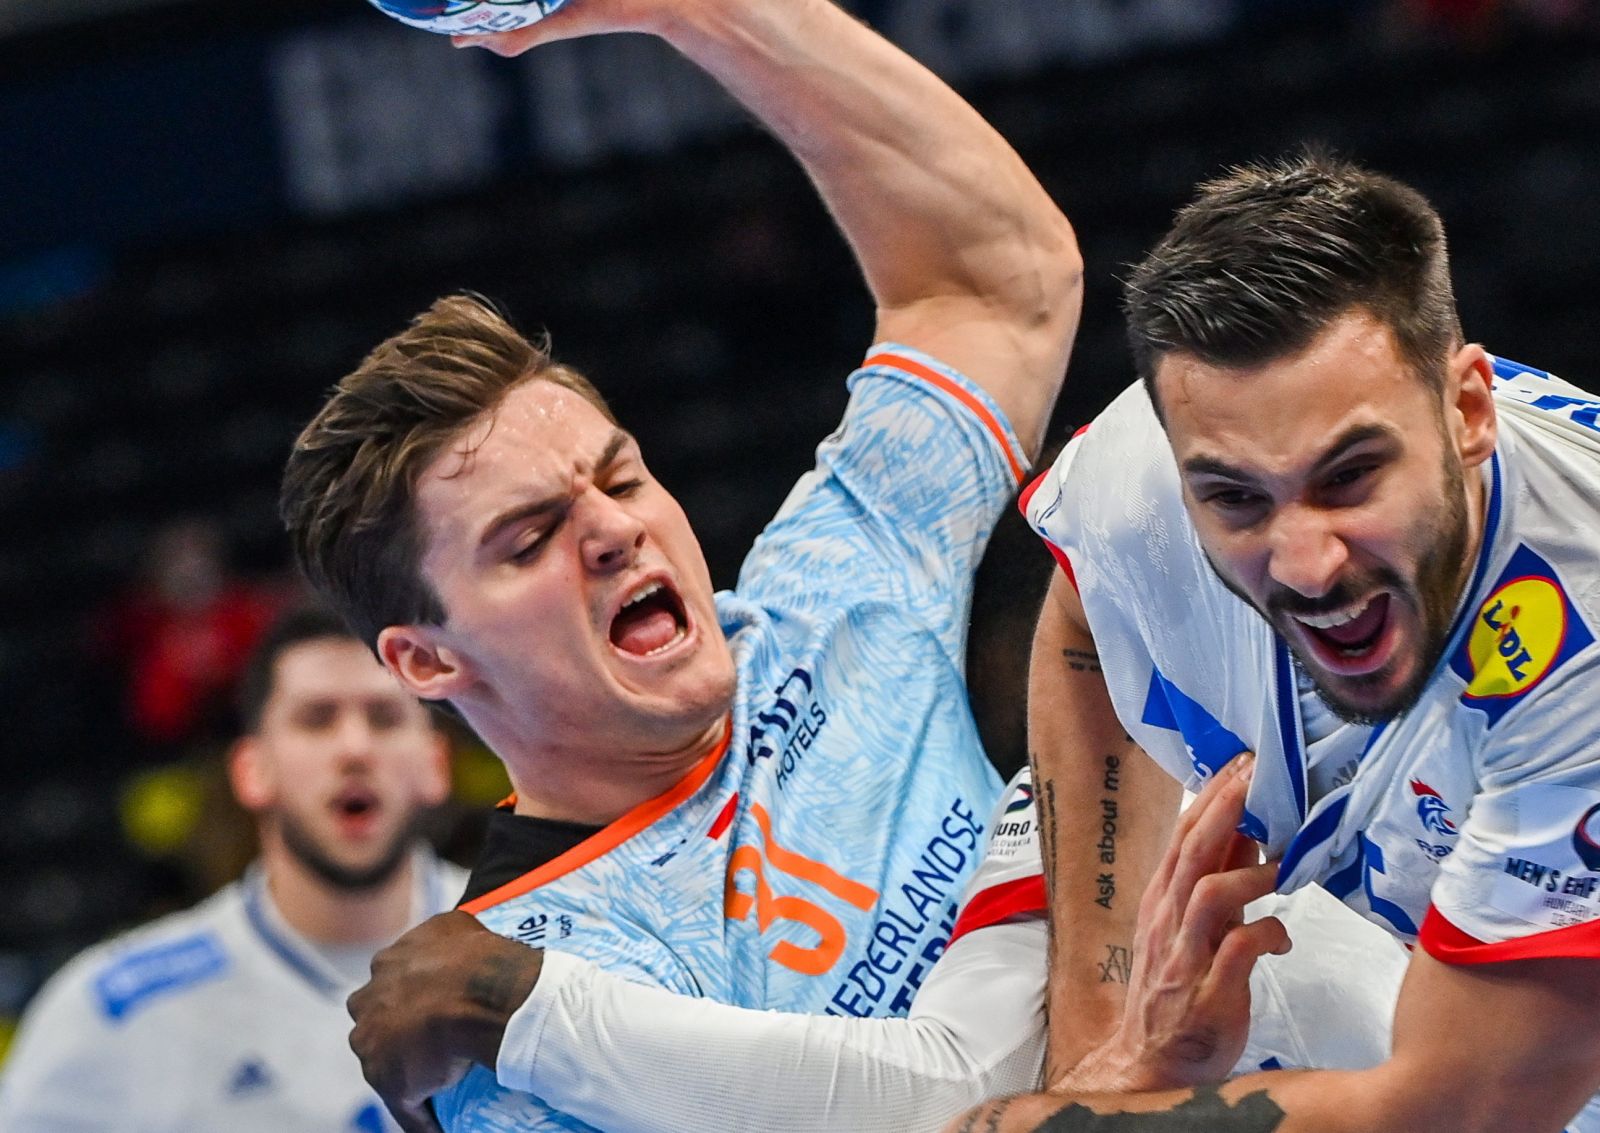 epa09697840 Hugo Descat (R) of France in action against Kay Smits (L) of Netherlands during the Men's European Handball Championship main round  match between France and the Netherlands at the MVM Dome in Budapest, Hungary, 20 January 2022.  EPA/Tibor Illyes HUNGARY OUT